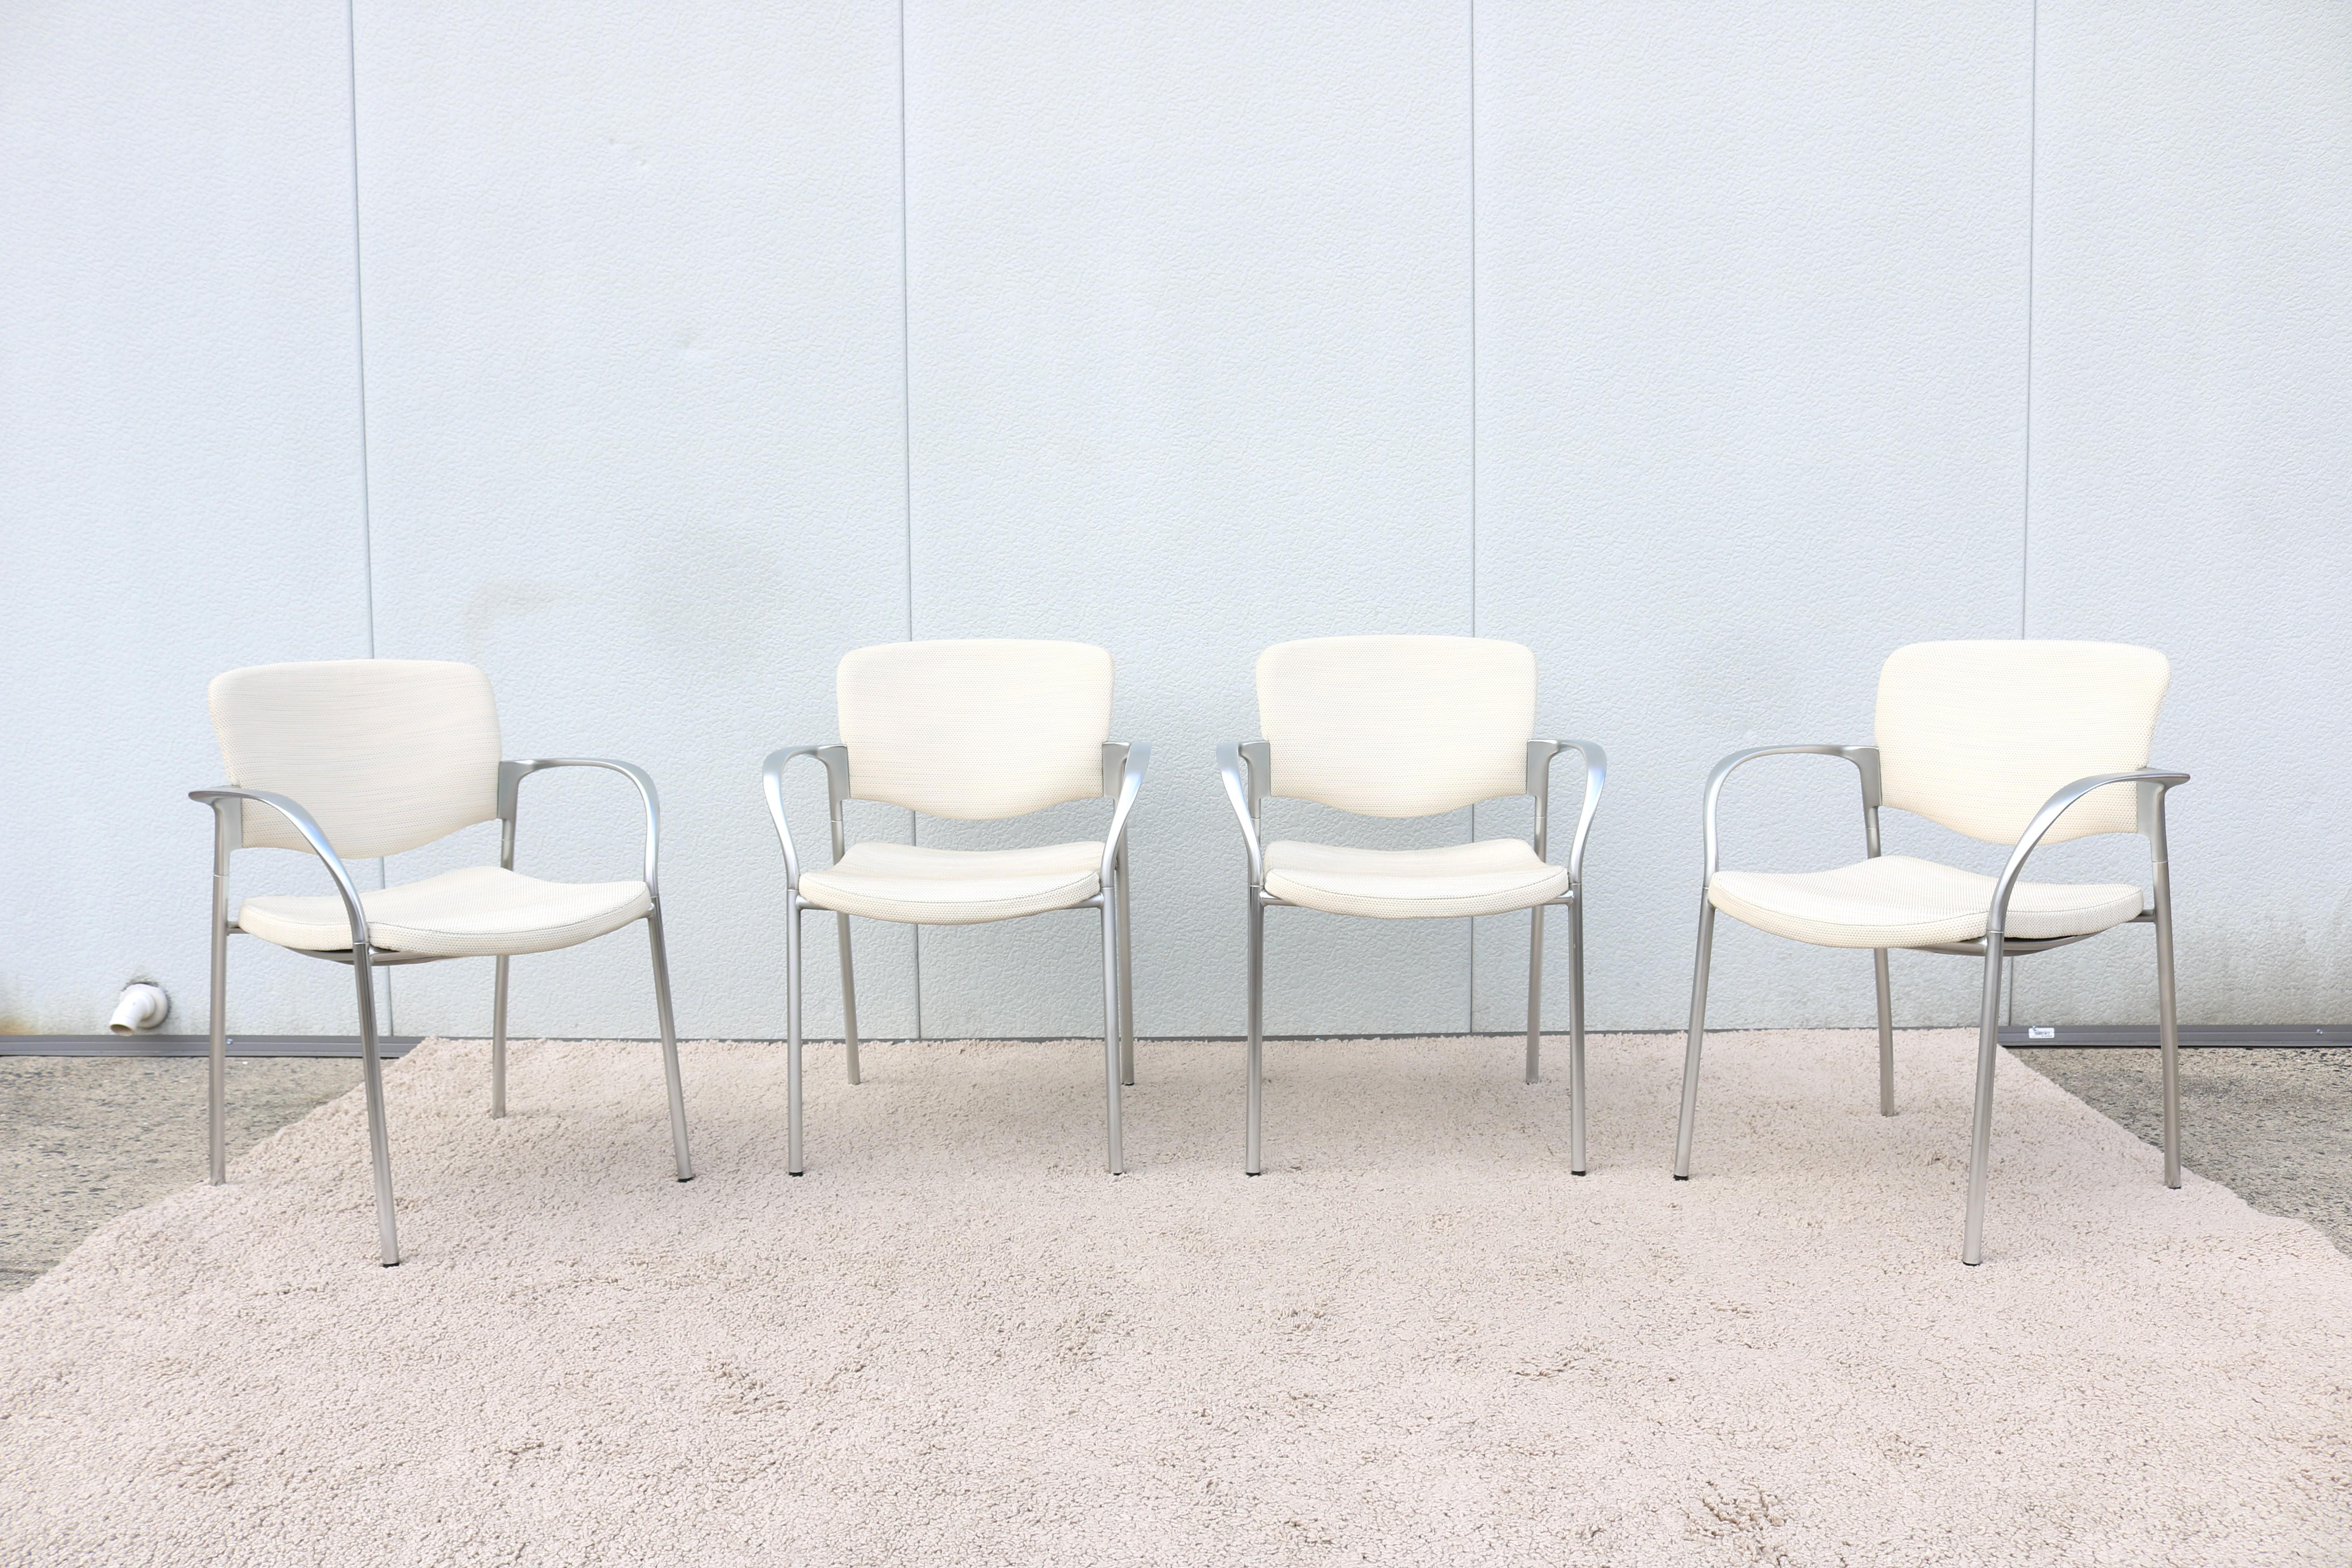 The welcome stackable chair by Stylex is very sleek with a clean contemporary look. 
The lightweight design and stacking feature make it suitable for most diverse situations and needs.
A beautiful multi-purpose chairs for modern home and workplace